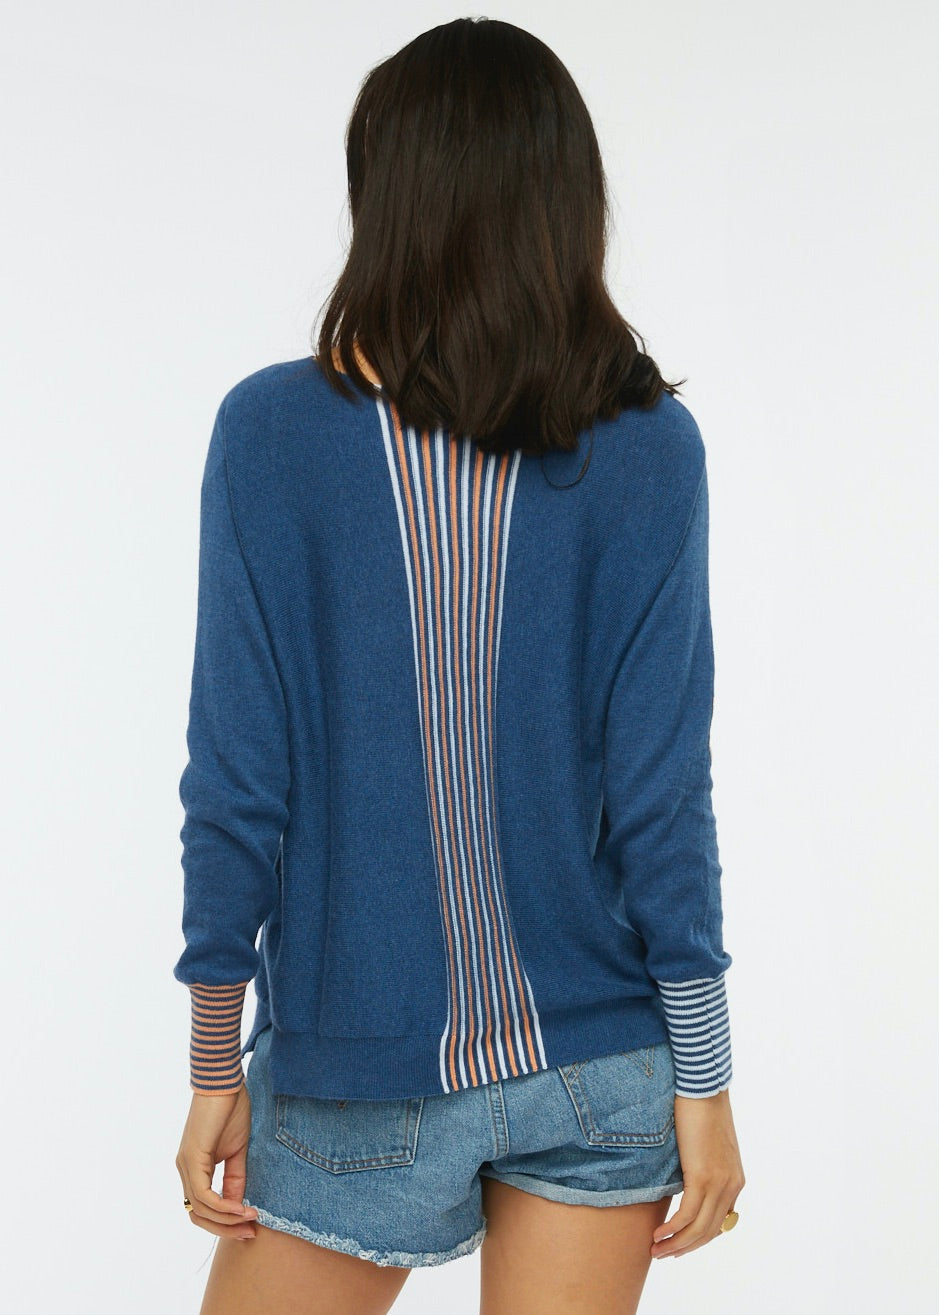 Zaket & Plover Zaket & Plover - Spot Sweater - Jean available at The Good Life Boutique